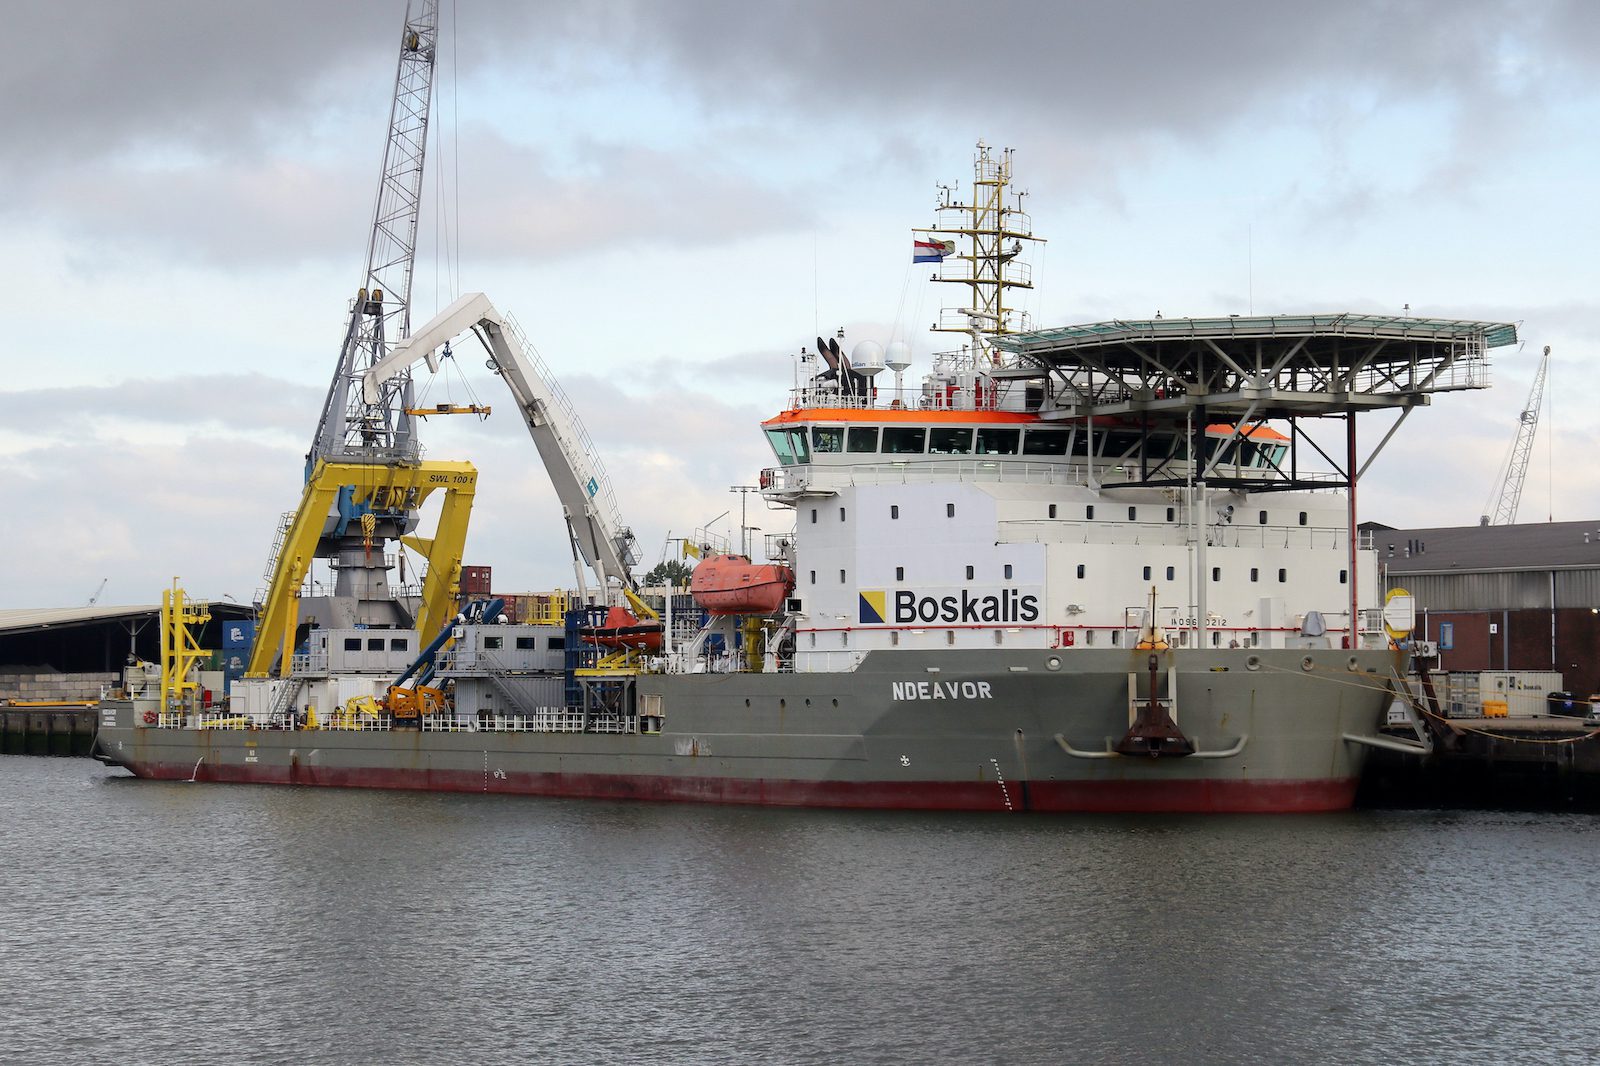 Boskalis Consortium Wins Grant to Research Green Methanol for Emissions-Free Shipping Transition